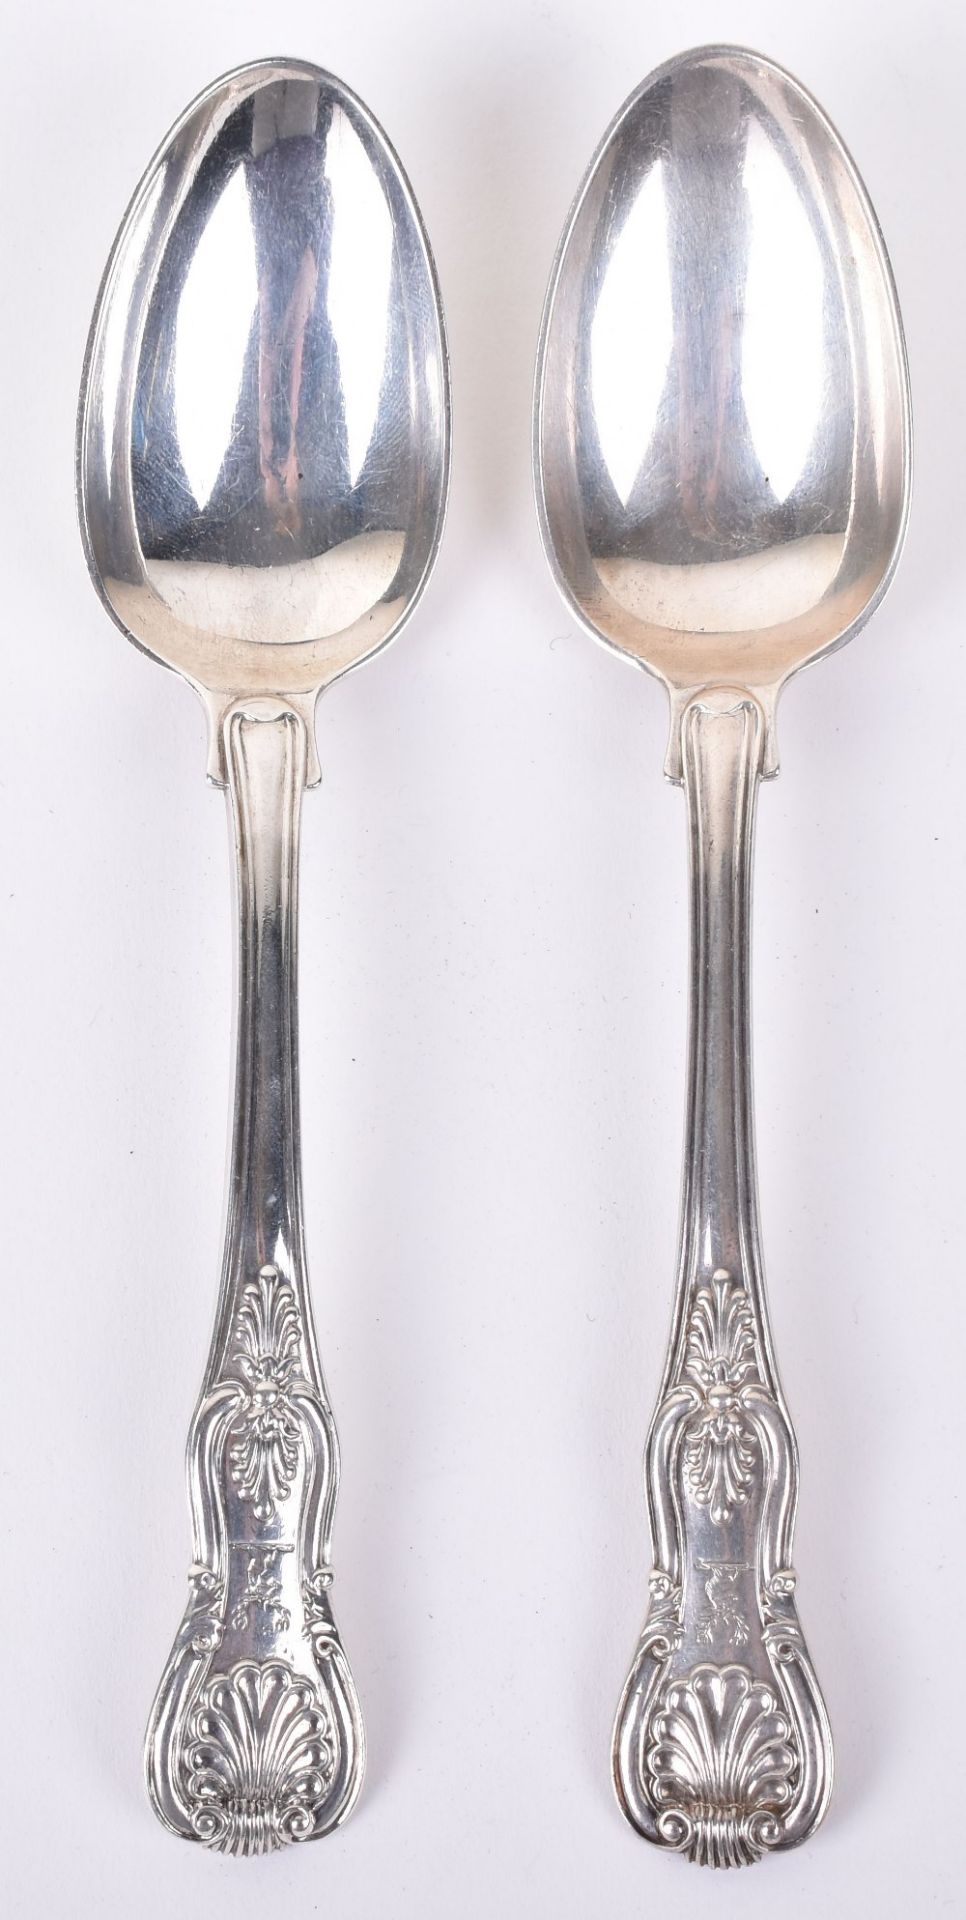 A pair of George IV fiddle and shell pattern silver spoons, by Paul Storr, London, 1821